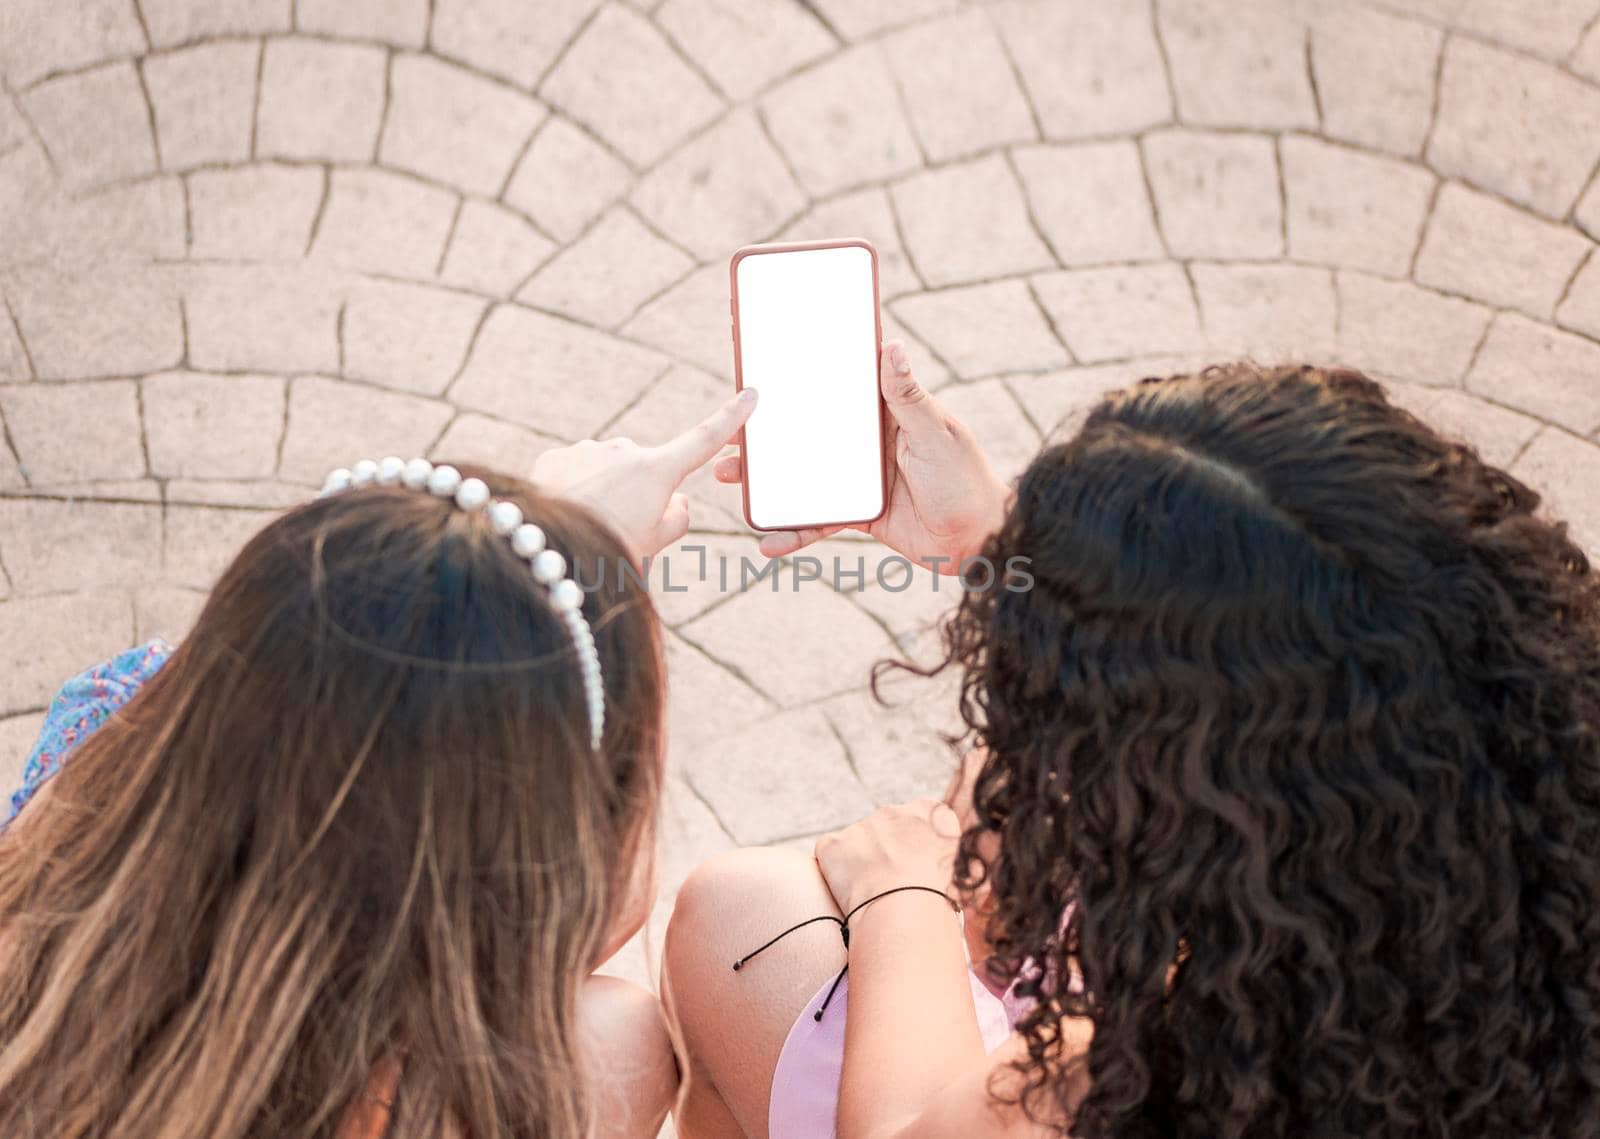 friend showing her cell phone screen, two girls pointing at her cell phone, Girl showing her smartphone to her friend by isaiphoto